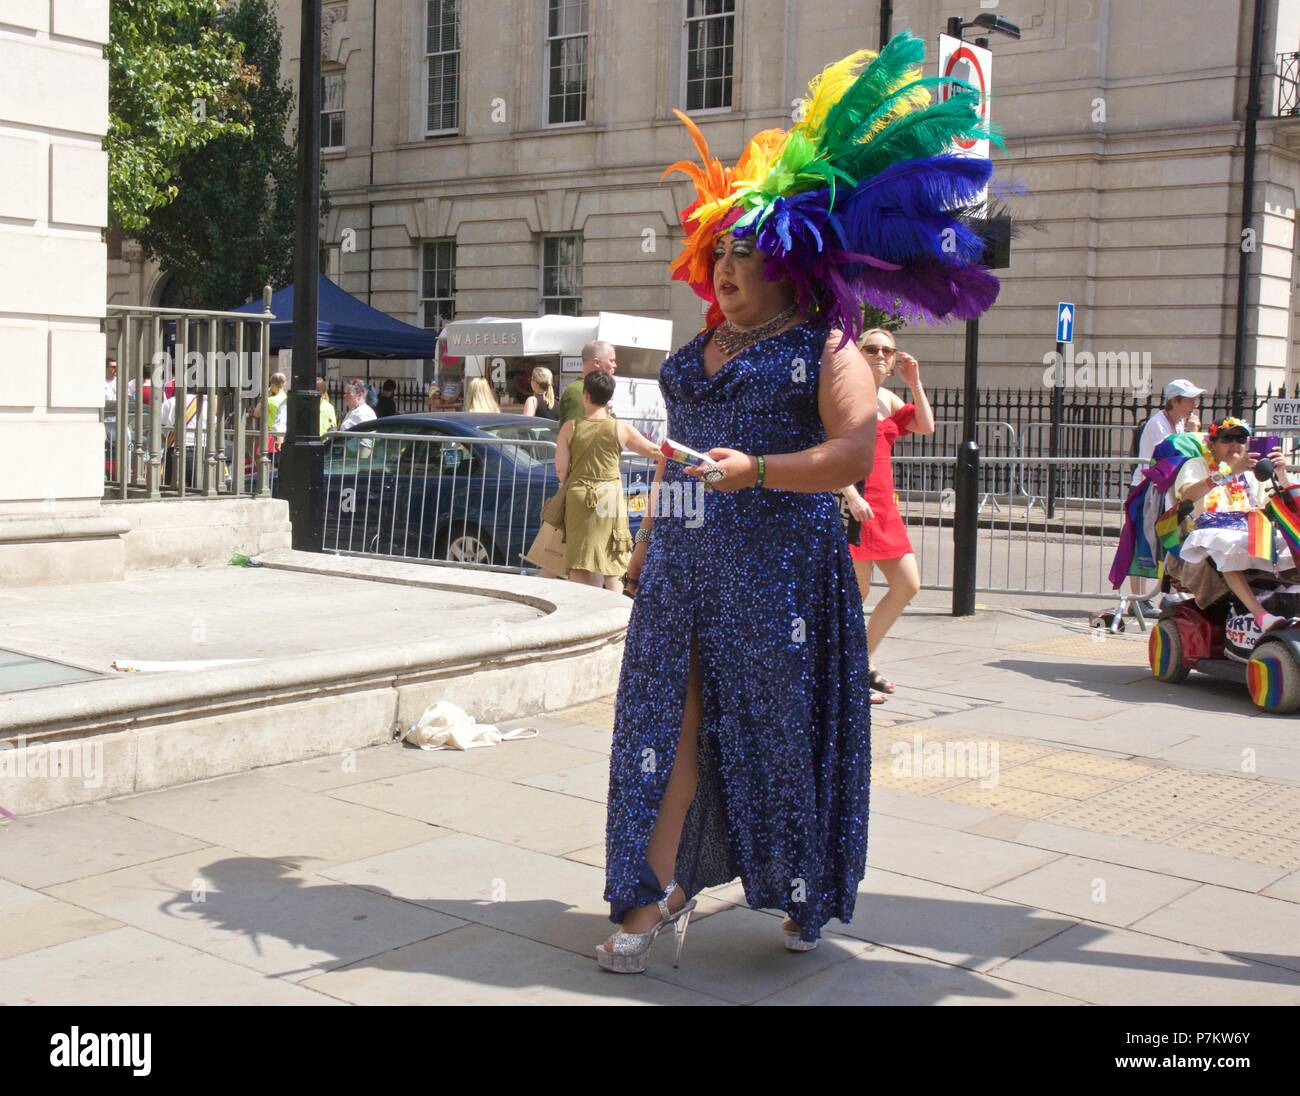 London, UK. 7th July 2018. Pride celebrations in London. A drag queen with rainbow feathers at Pride in London 2018 Parade.  Credit: Dimple Patel/Alamy Live News Stock Photo